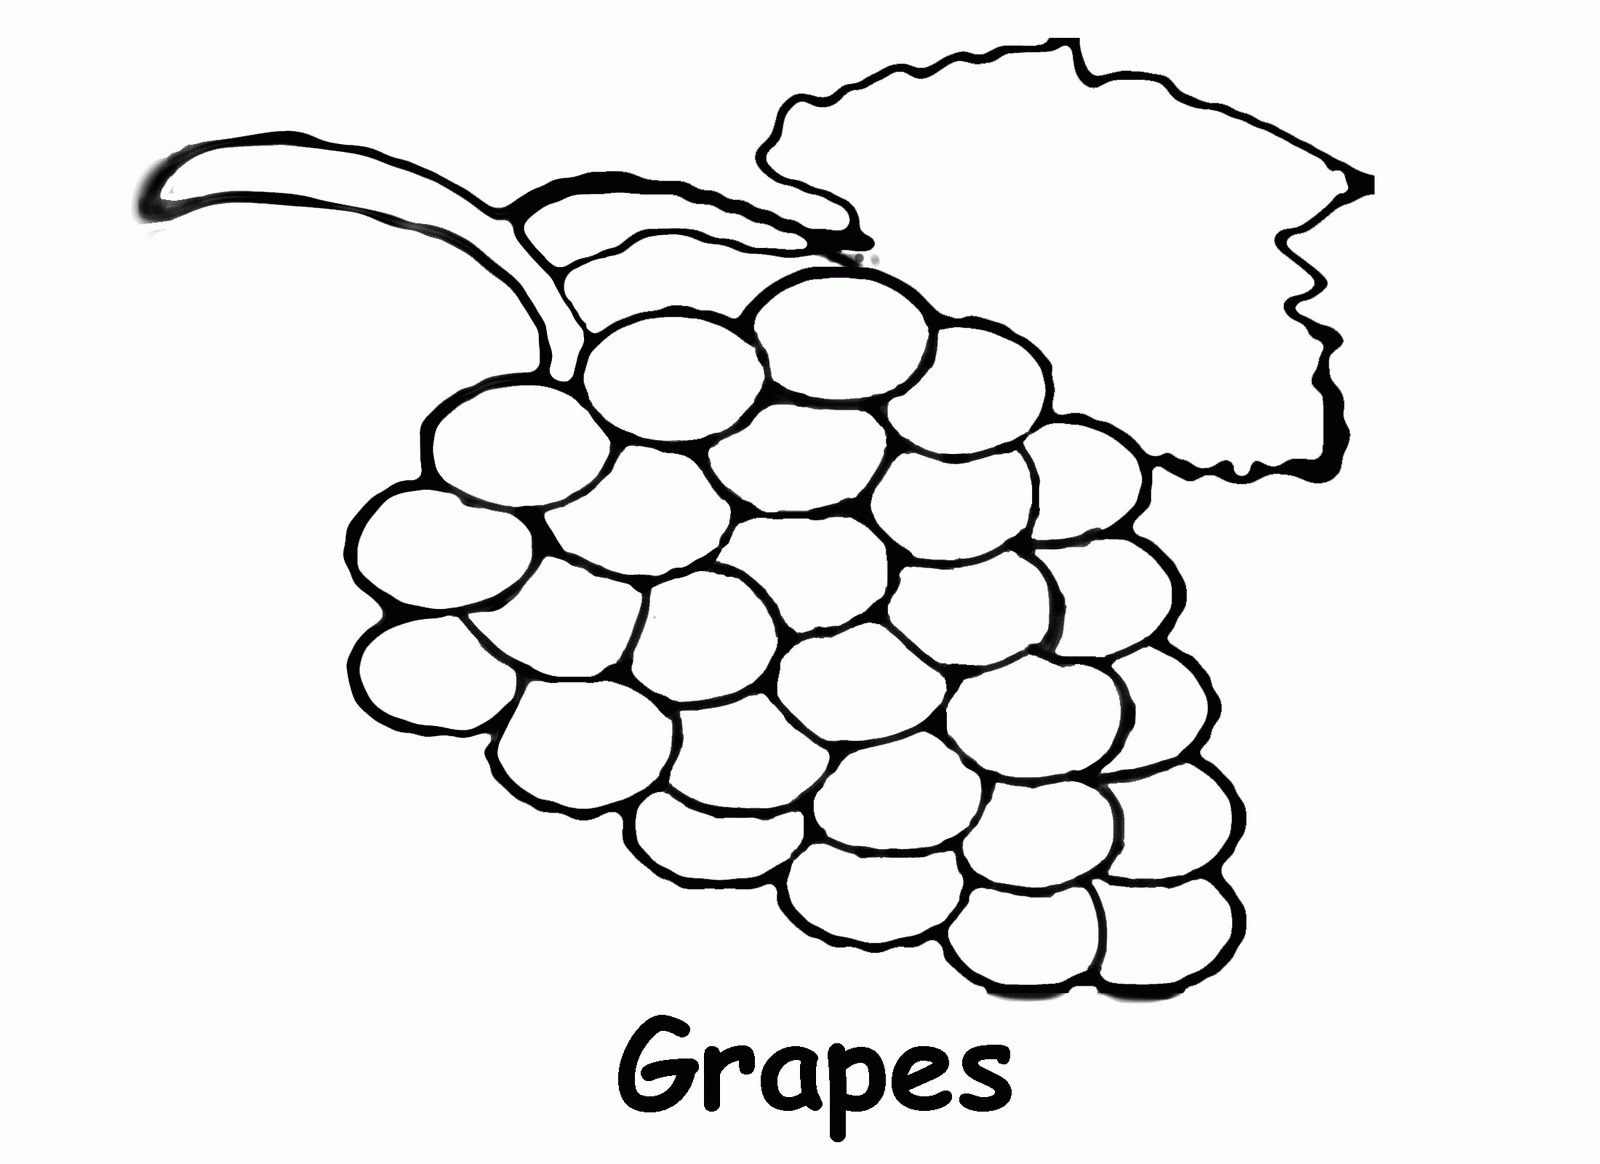 Download Grapes Coloring Page - Coloring Home